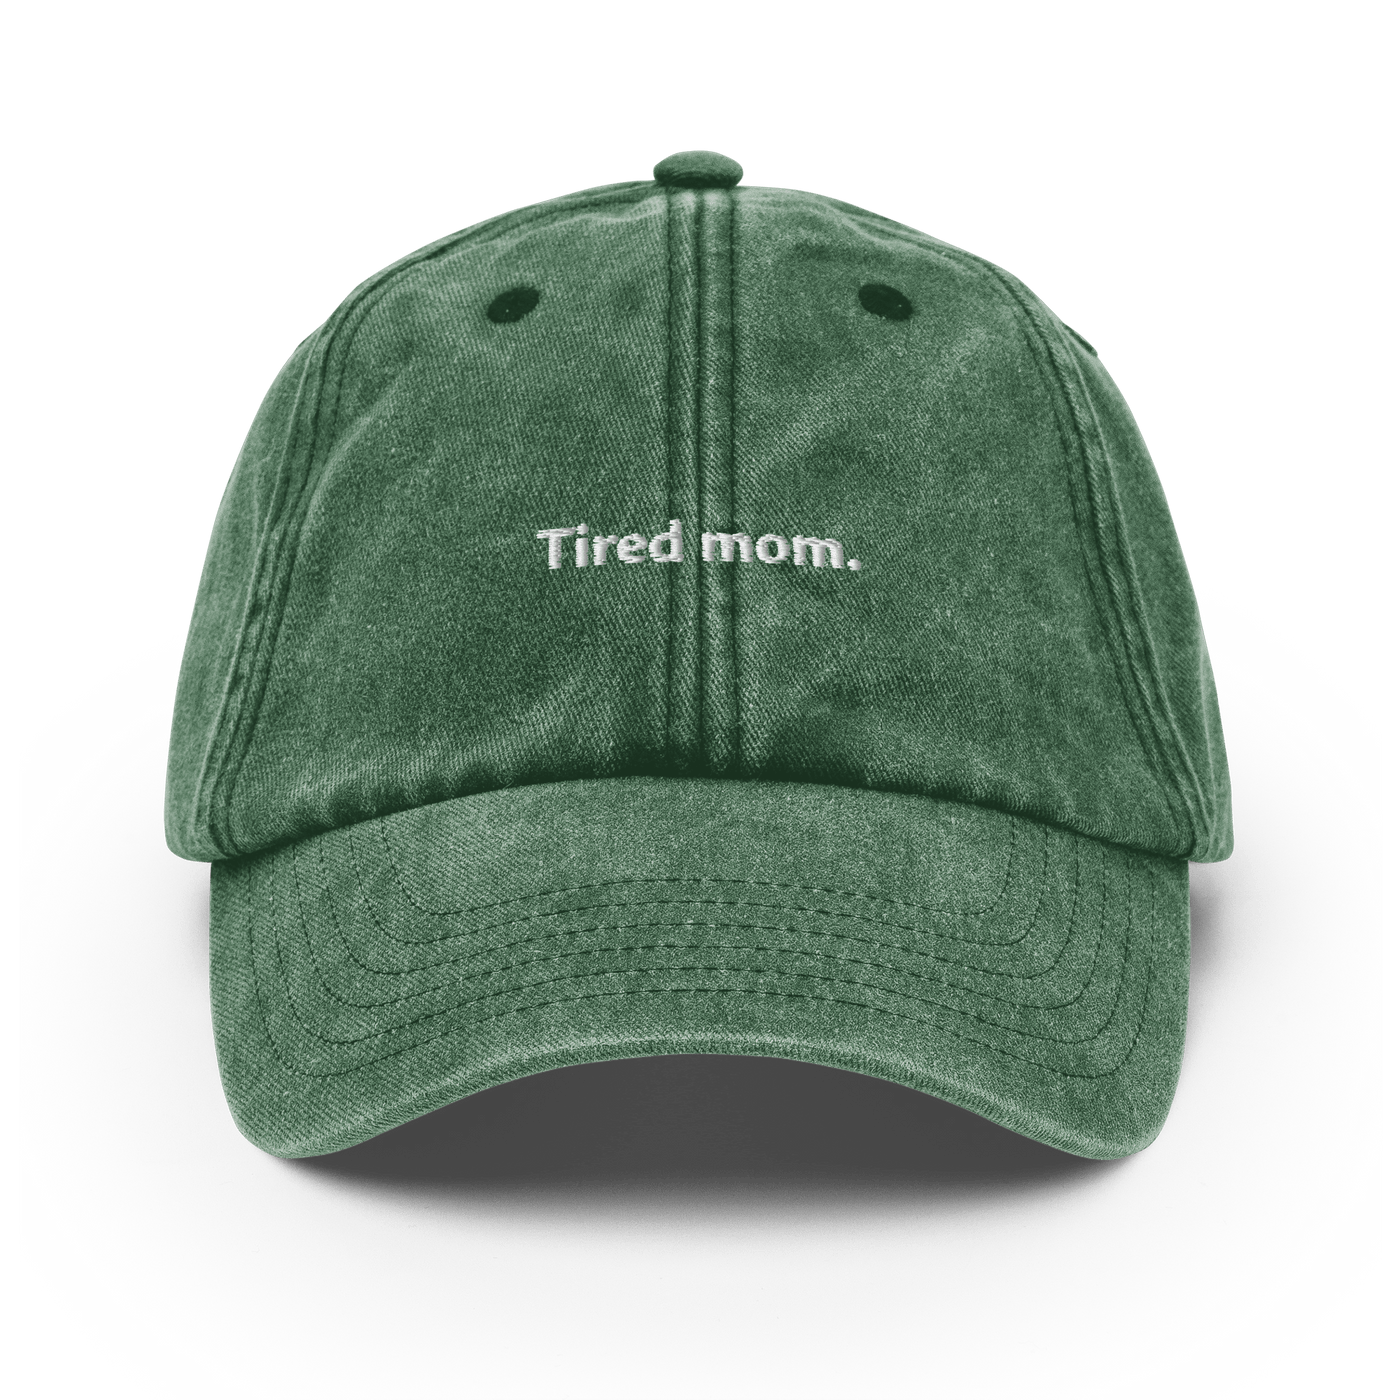 Tired Mom Vintage Hat - Vintage Bottle Green - - Just Another Cap Store